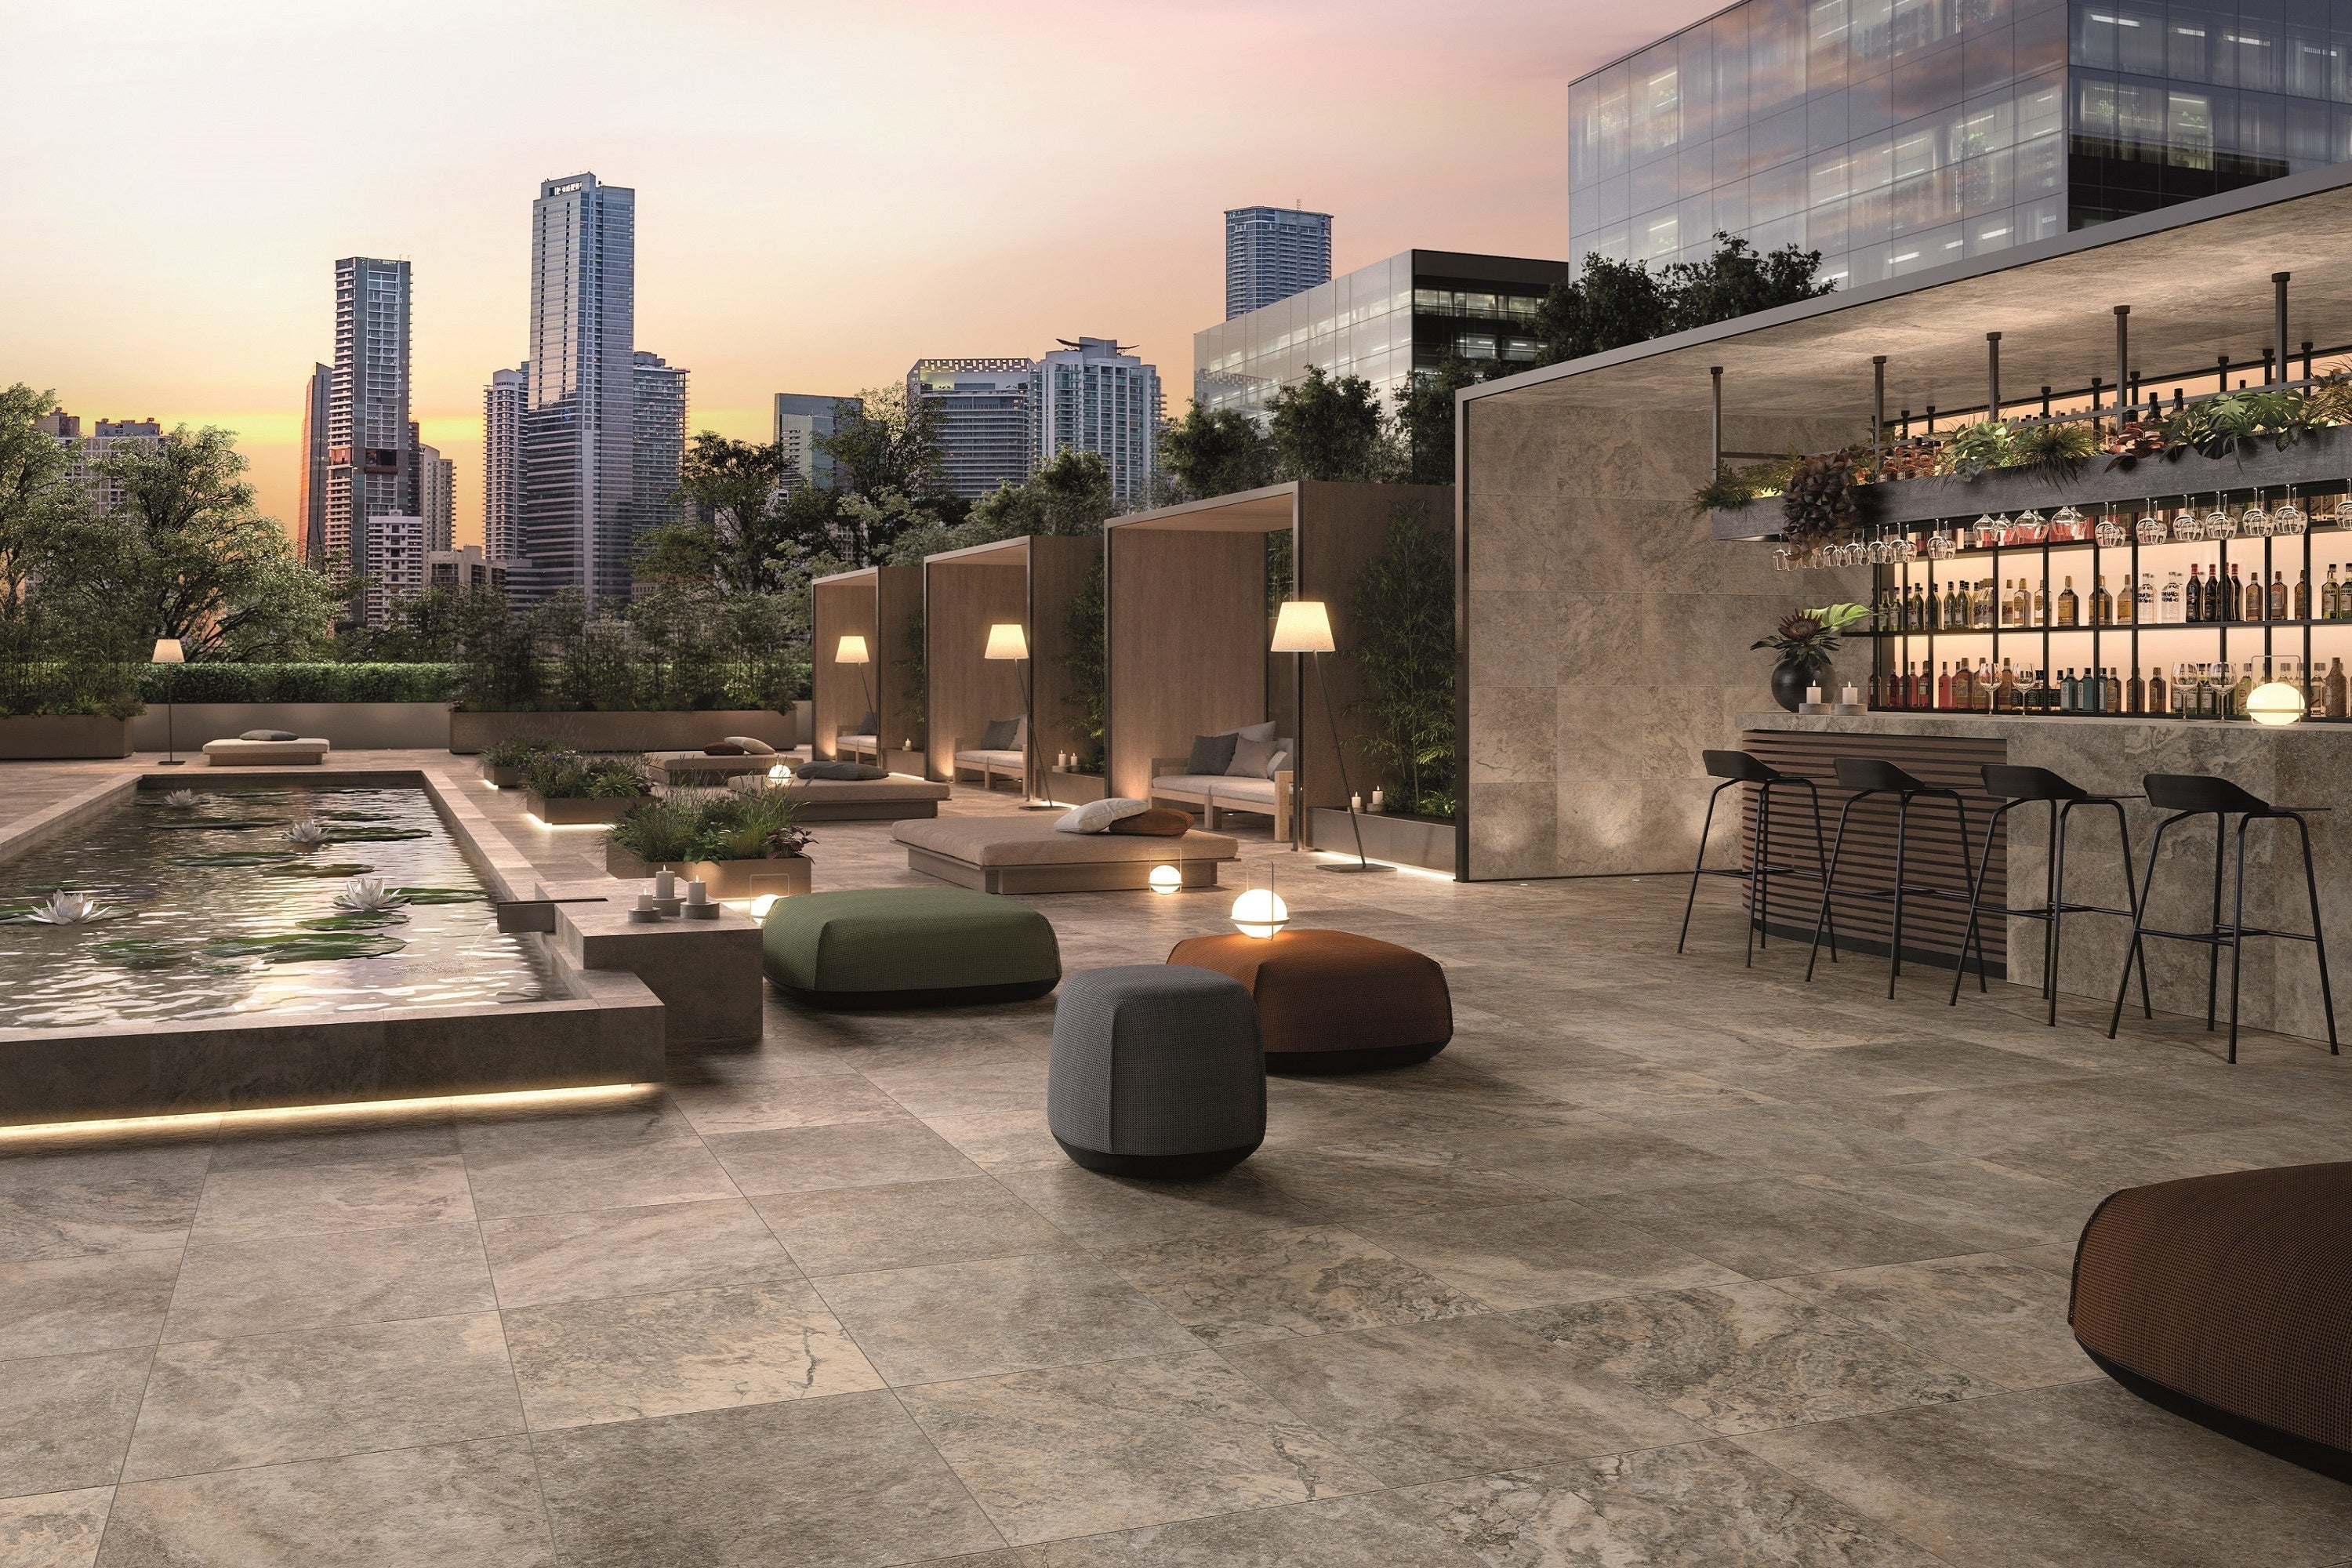 Luxurious travertine porcelain tile collection by Surface Group showcased in an elegant outdoor patio setting with city skyline background.